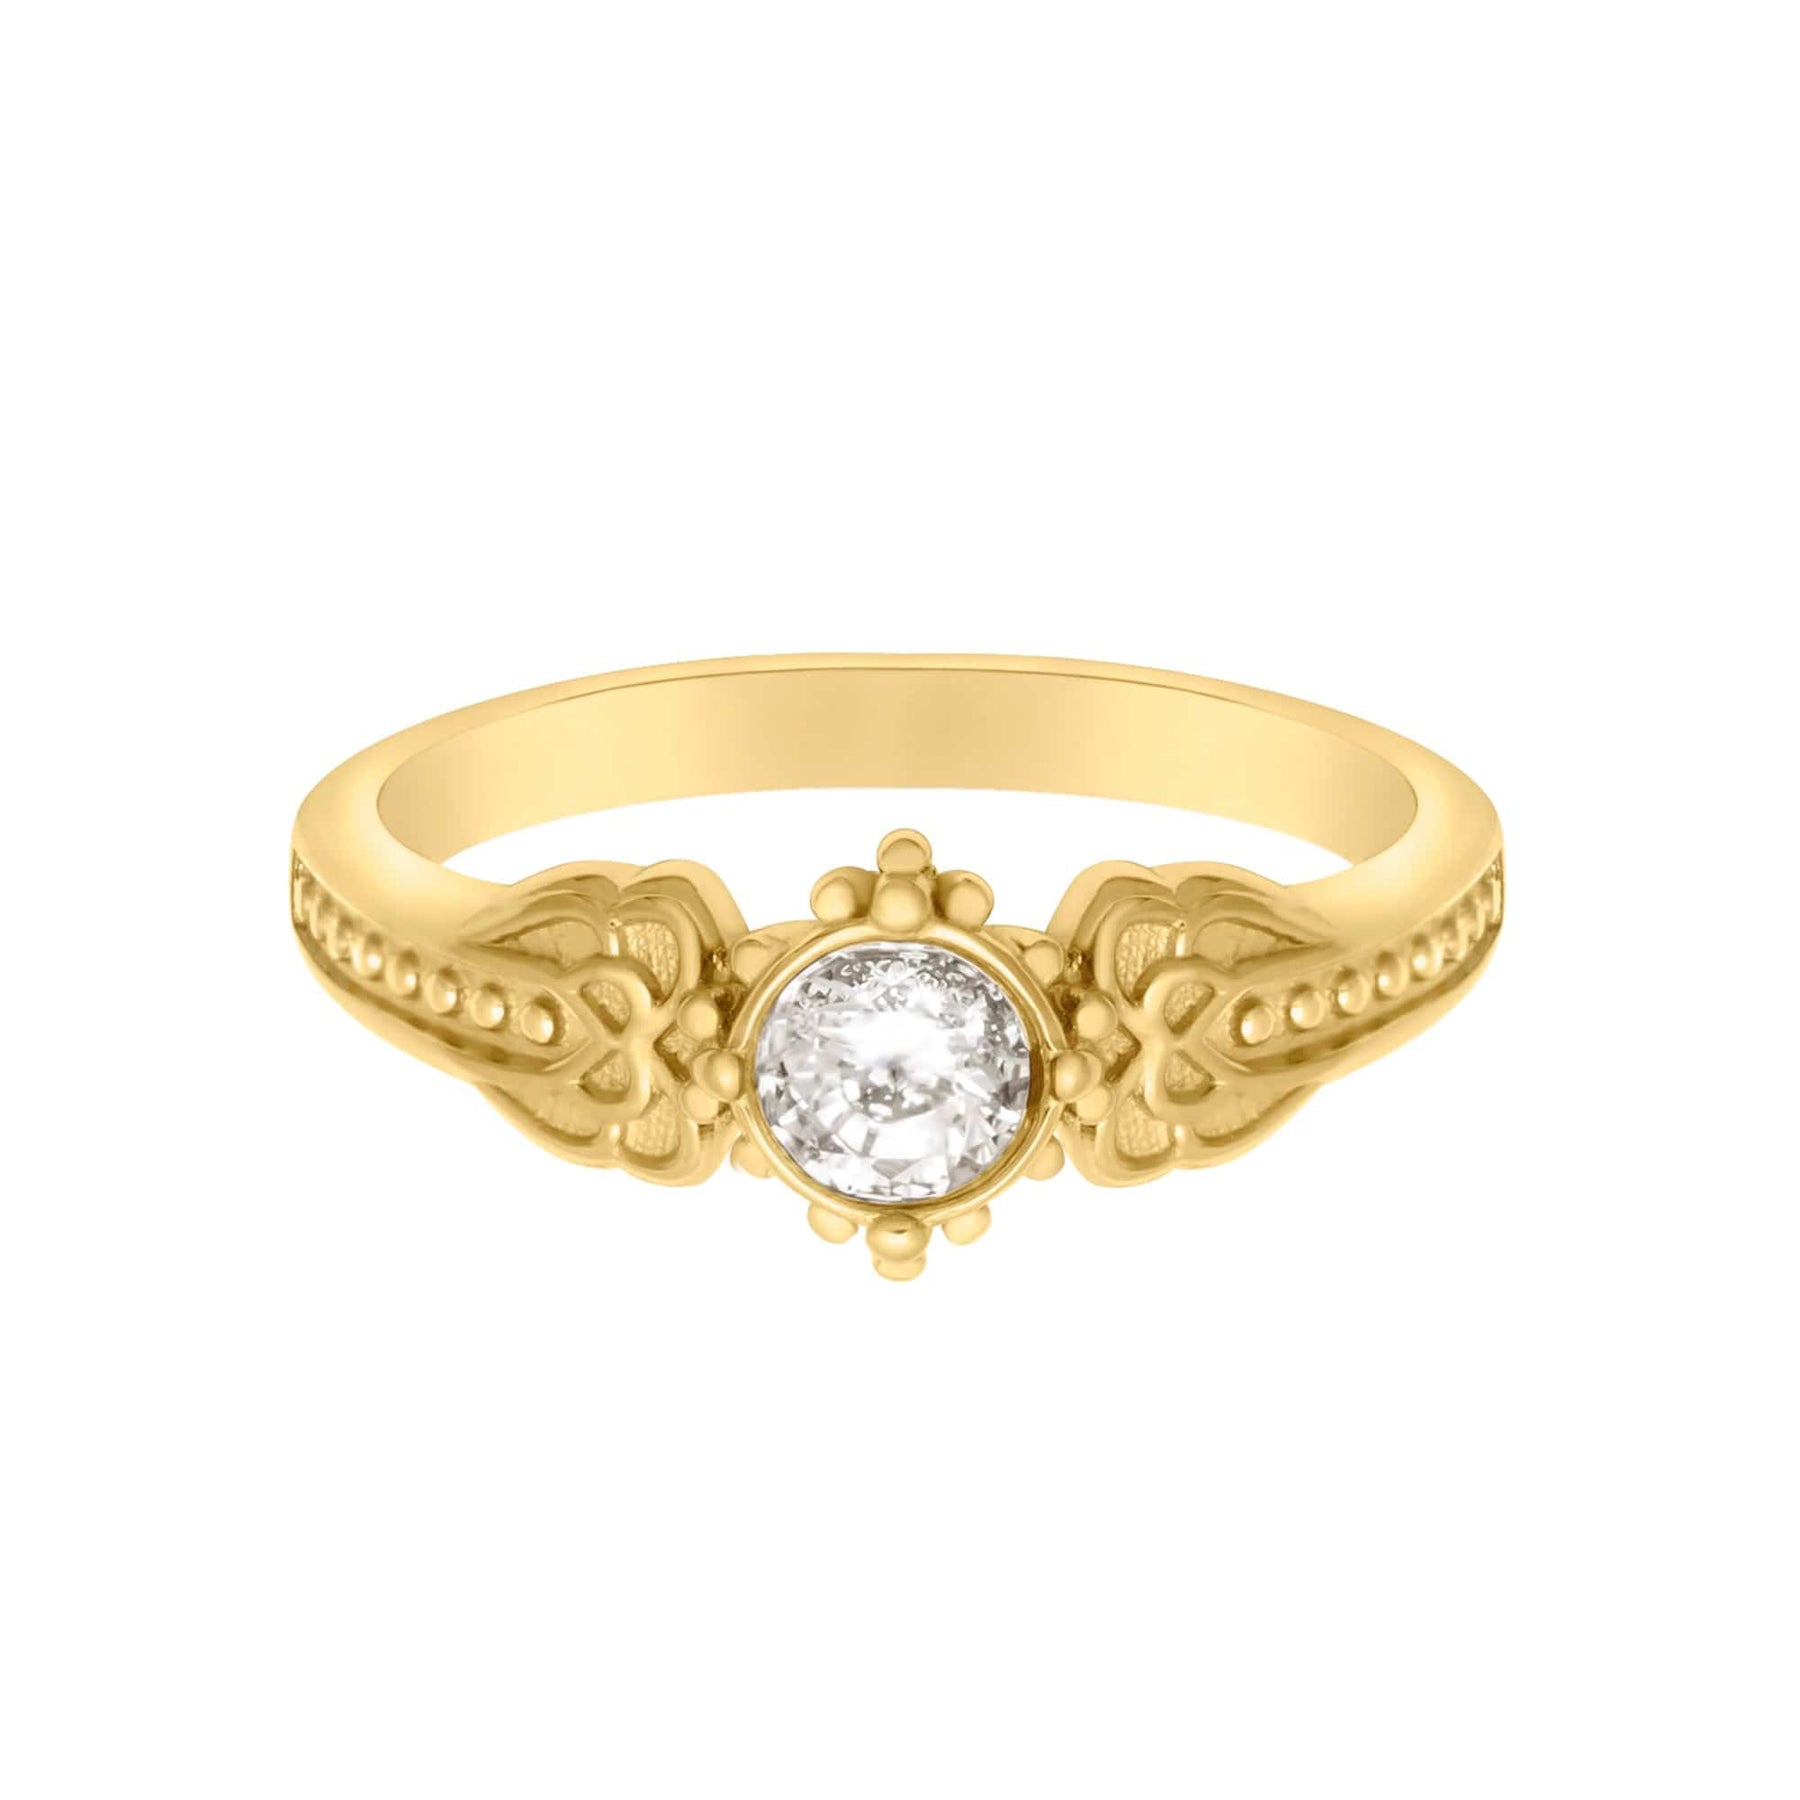 BohoMoon Stainless Steel Aaliyah Ring Gold / US 6 / UK L / EUR 51 (small)